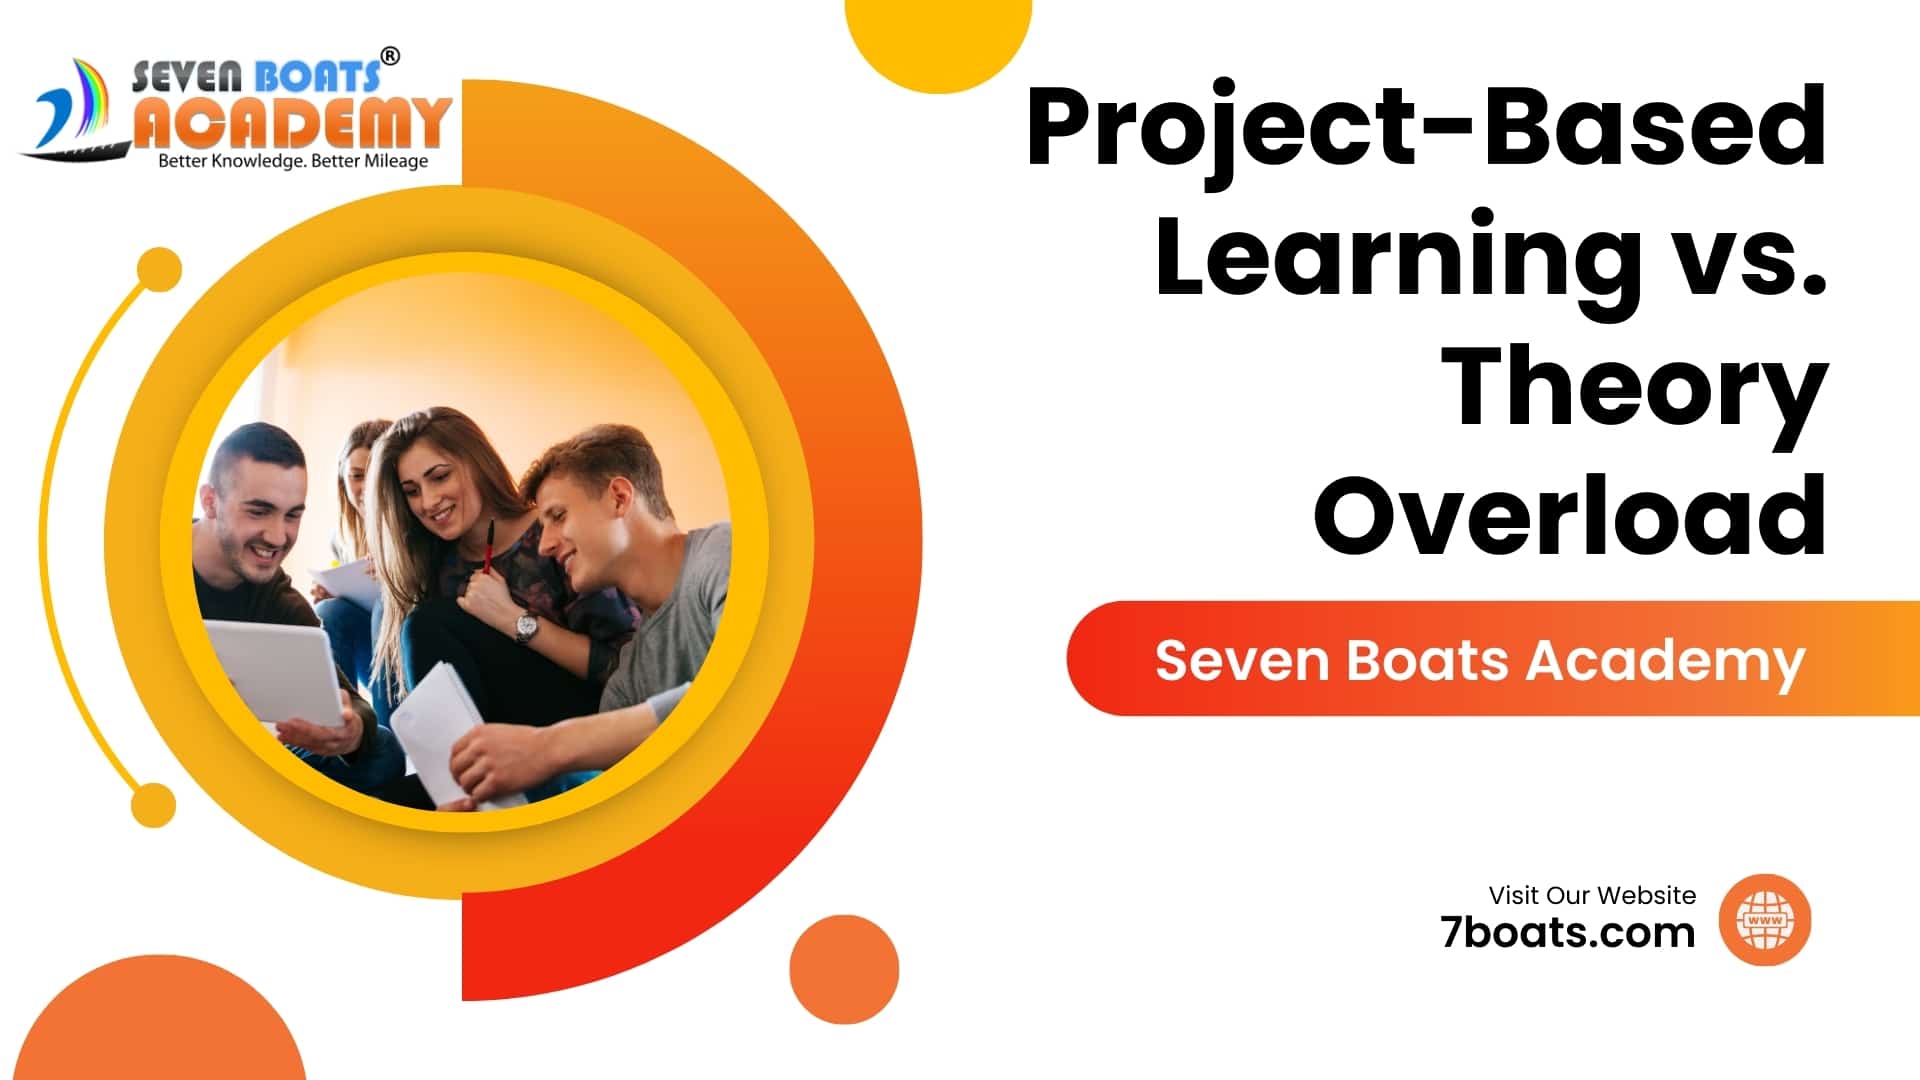 Project-Based Learning vs. Theory Overload Why Seven Boats Academy Gets Results